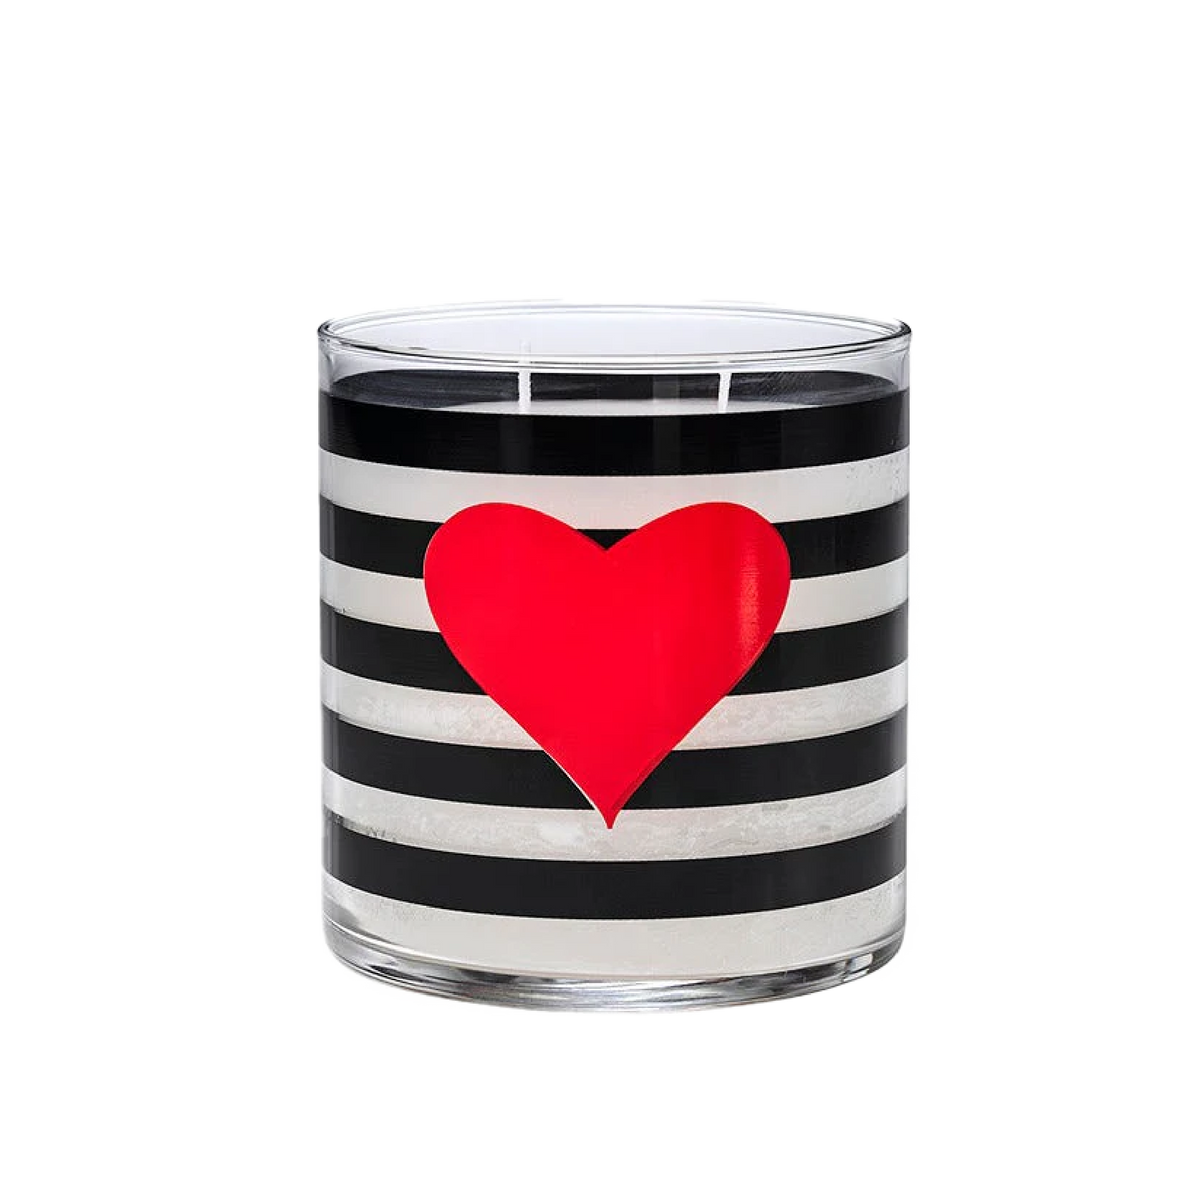 GloLite by PartyLite Prisoner Of Love Scented 2-Wick Jar Candle